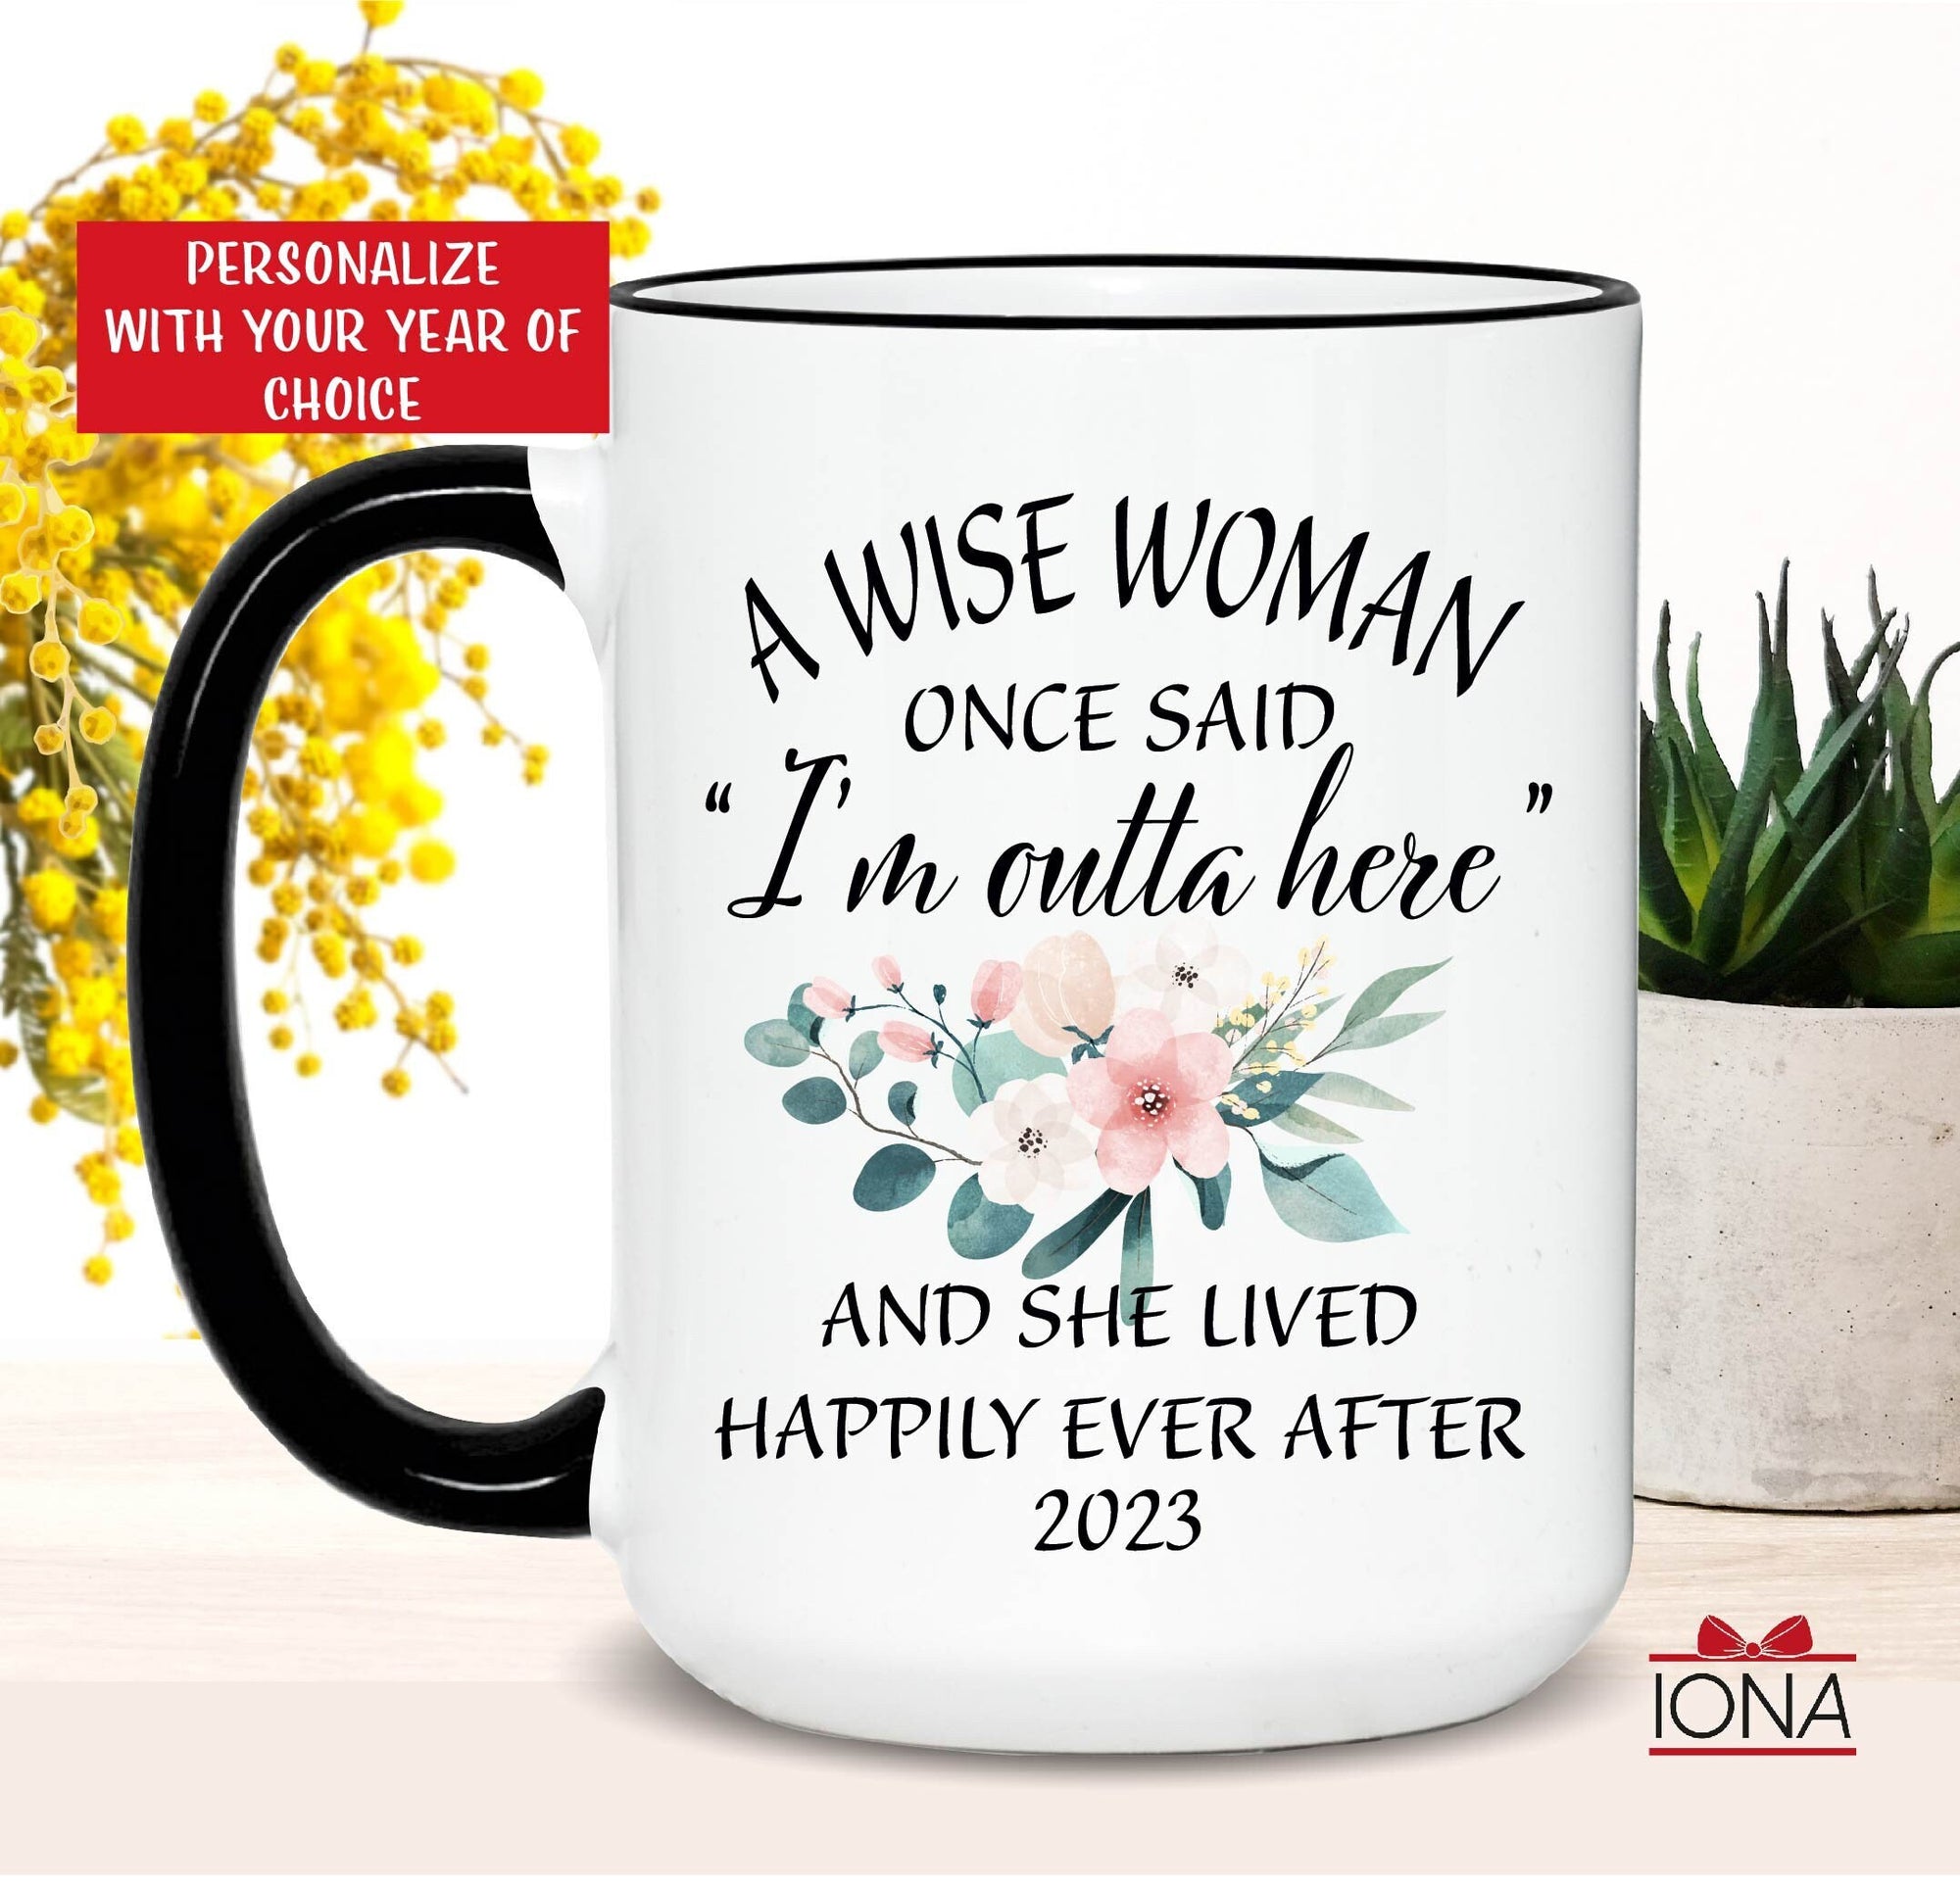 Retirement Gifts for Women - A Wise Woman Once Said - Funny Retirement Gift for Women from Coworkers, Retirement Mug - Happy Retirement